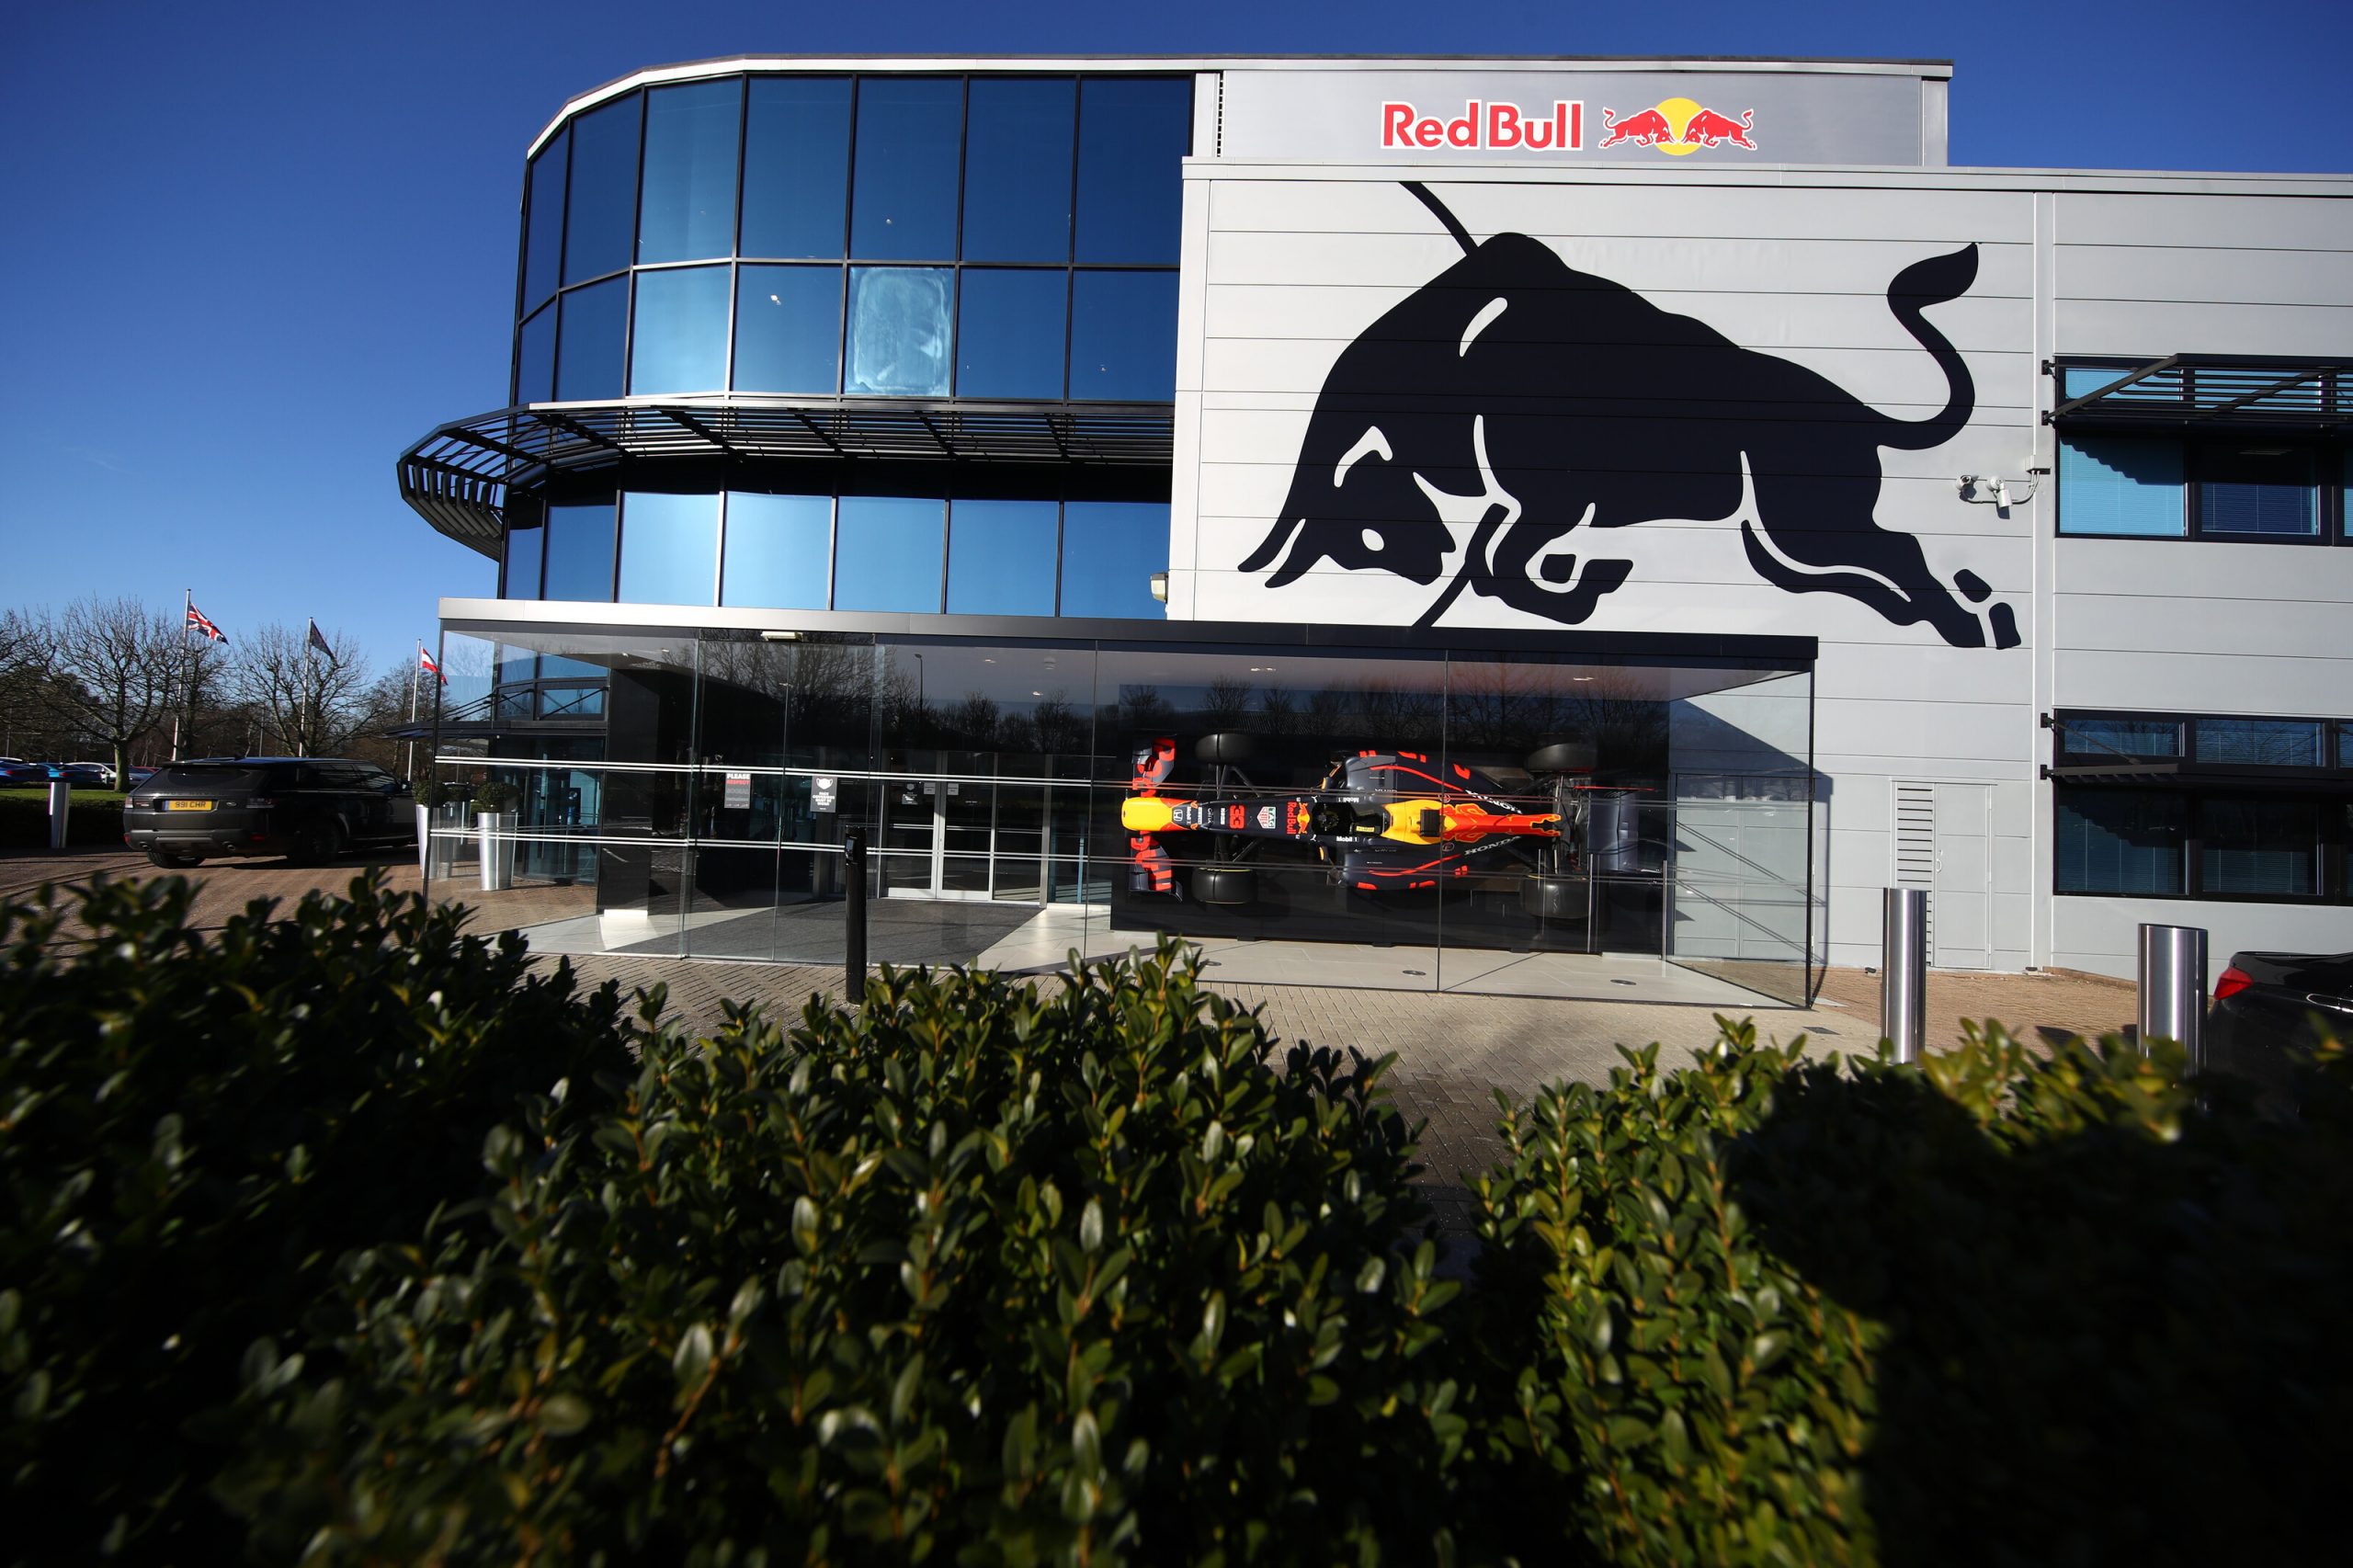 Red Bull names new Powertrains unit in memory of F1 legend